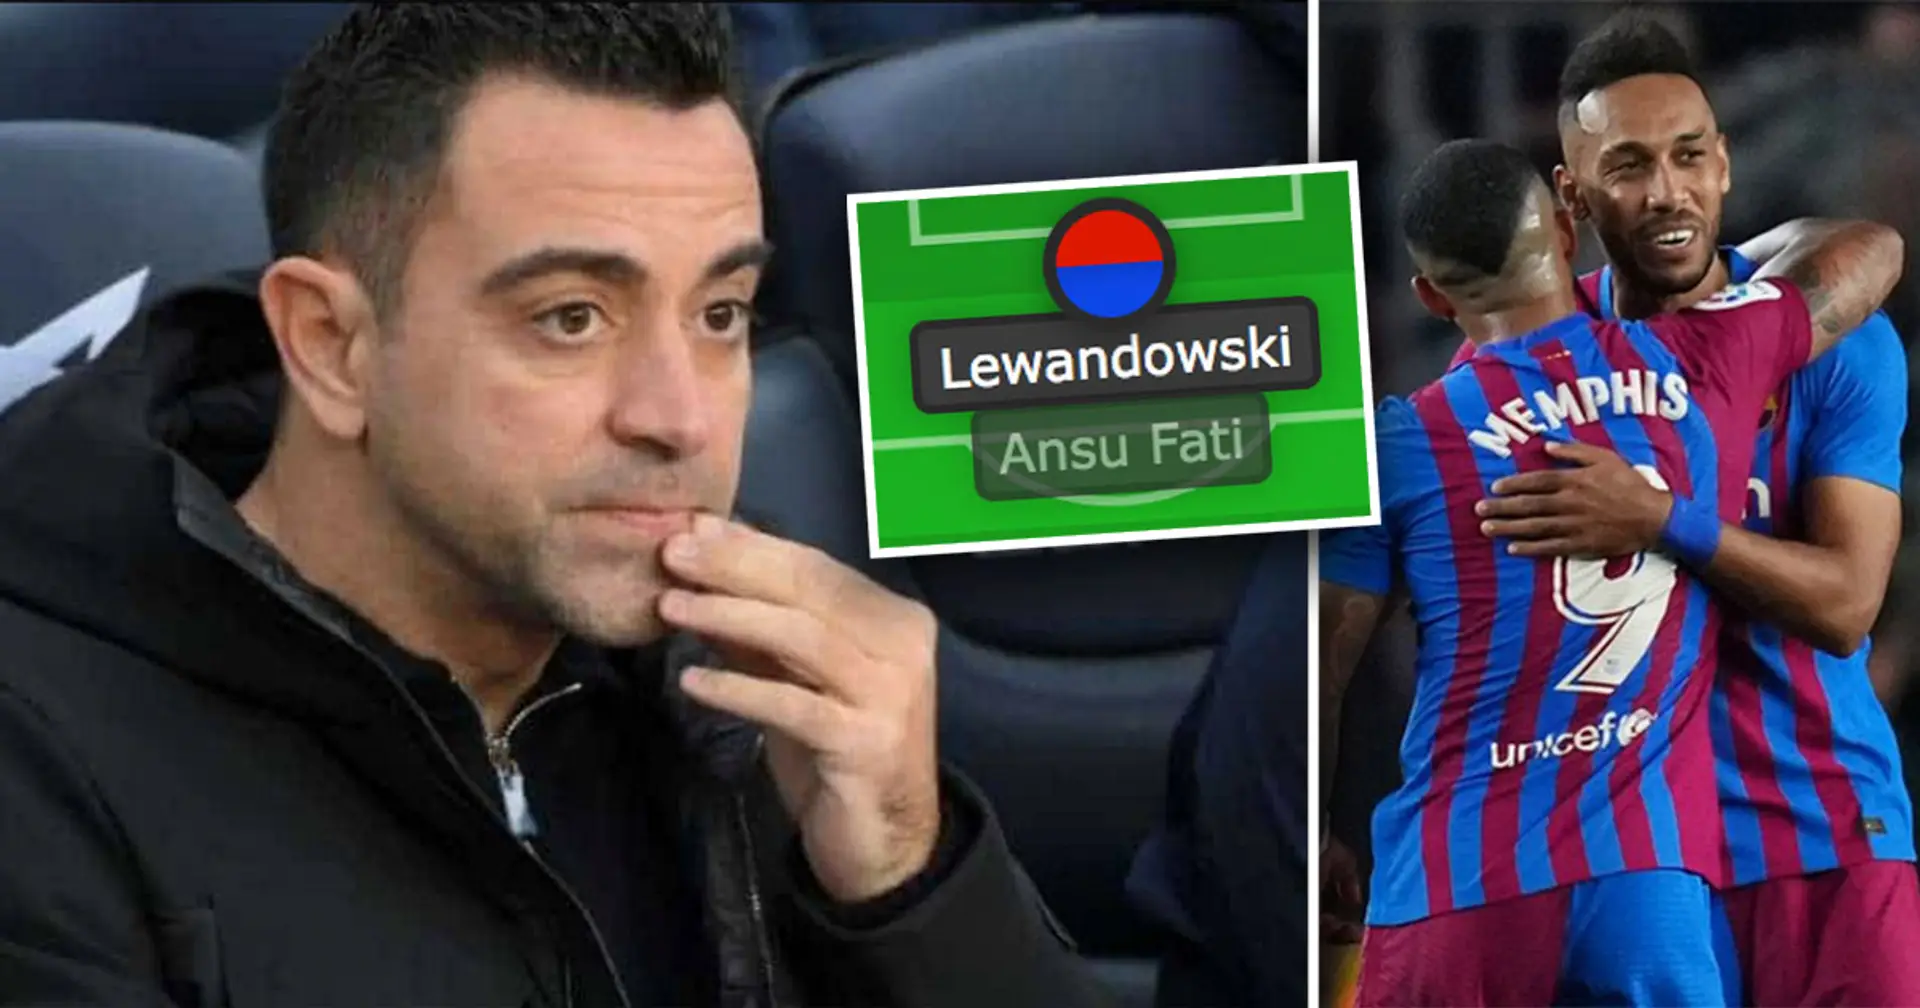 Barca's squad depth upfront if both Aubameyang and Memphis leave shown in lineup